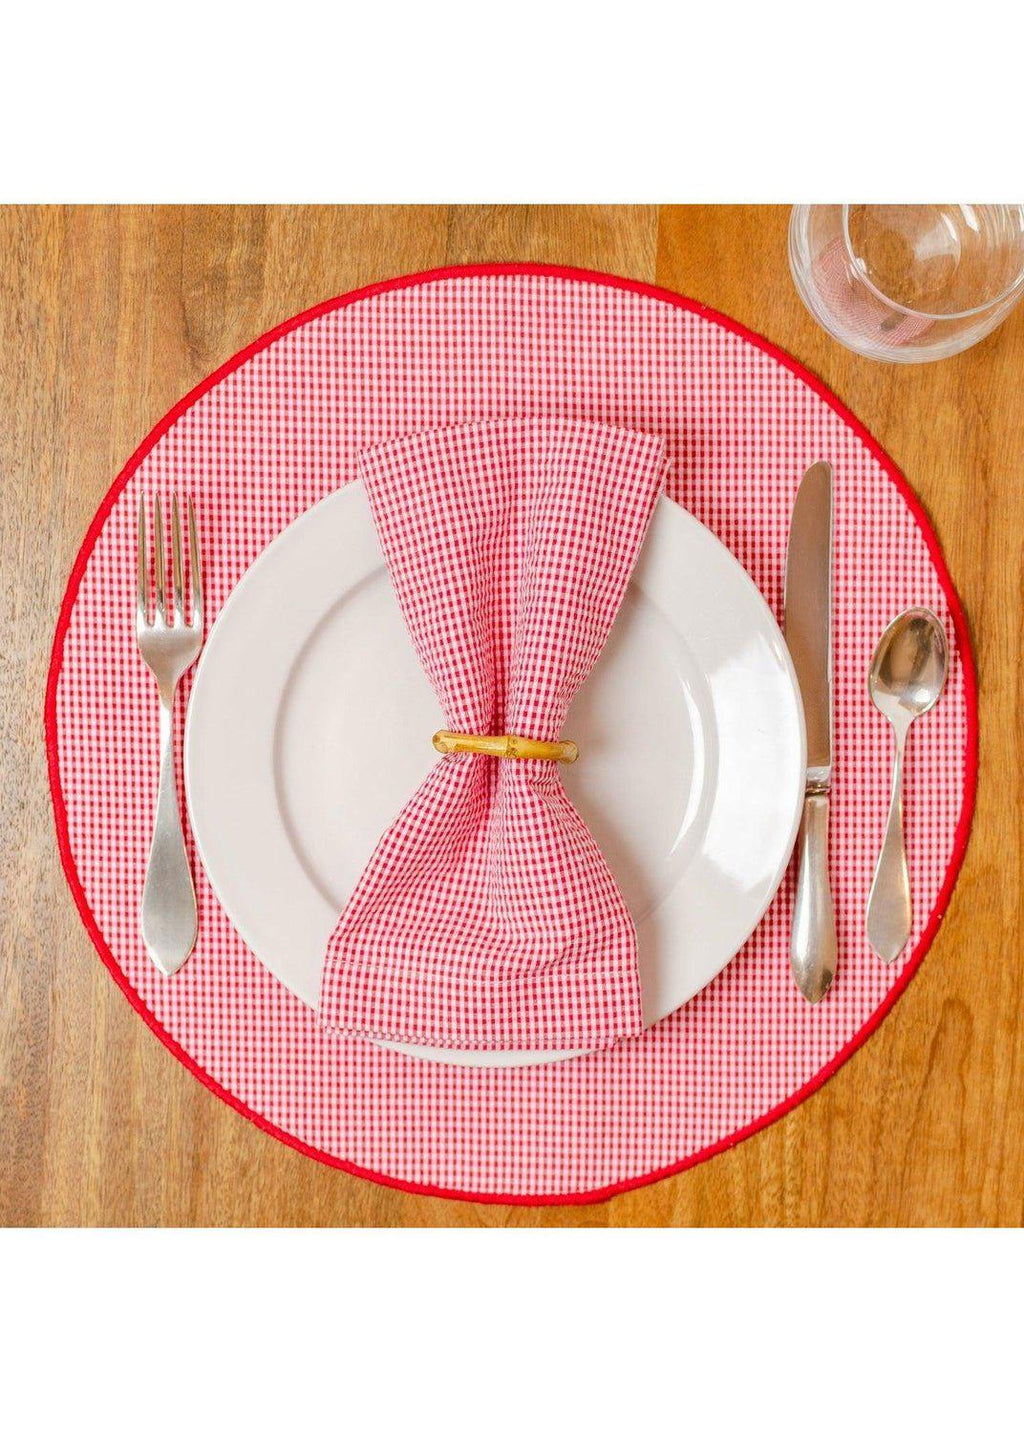 Placemat/Napkin 4/pc Set - Red Gingham Check/Red Set-2